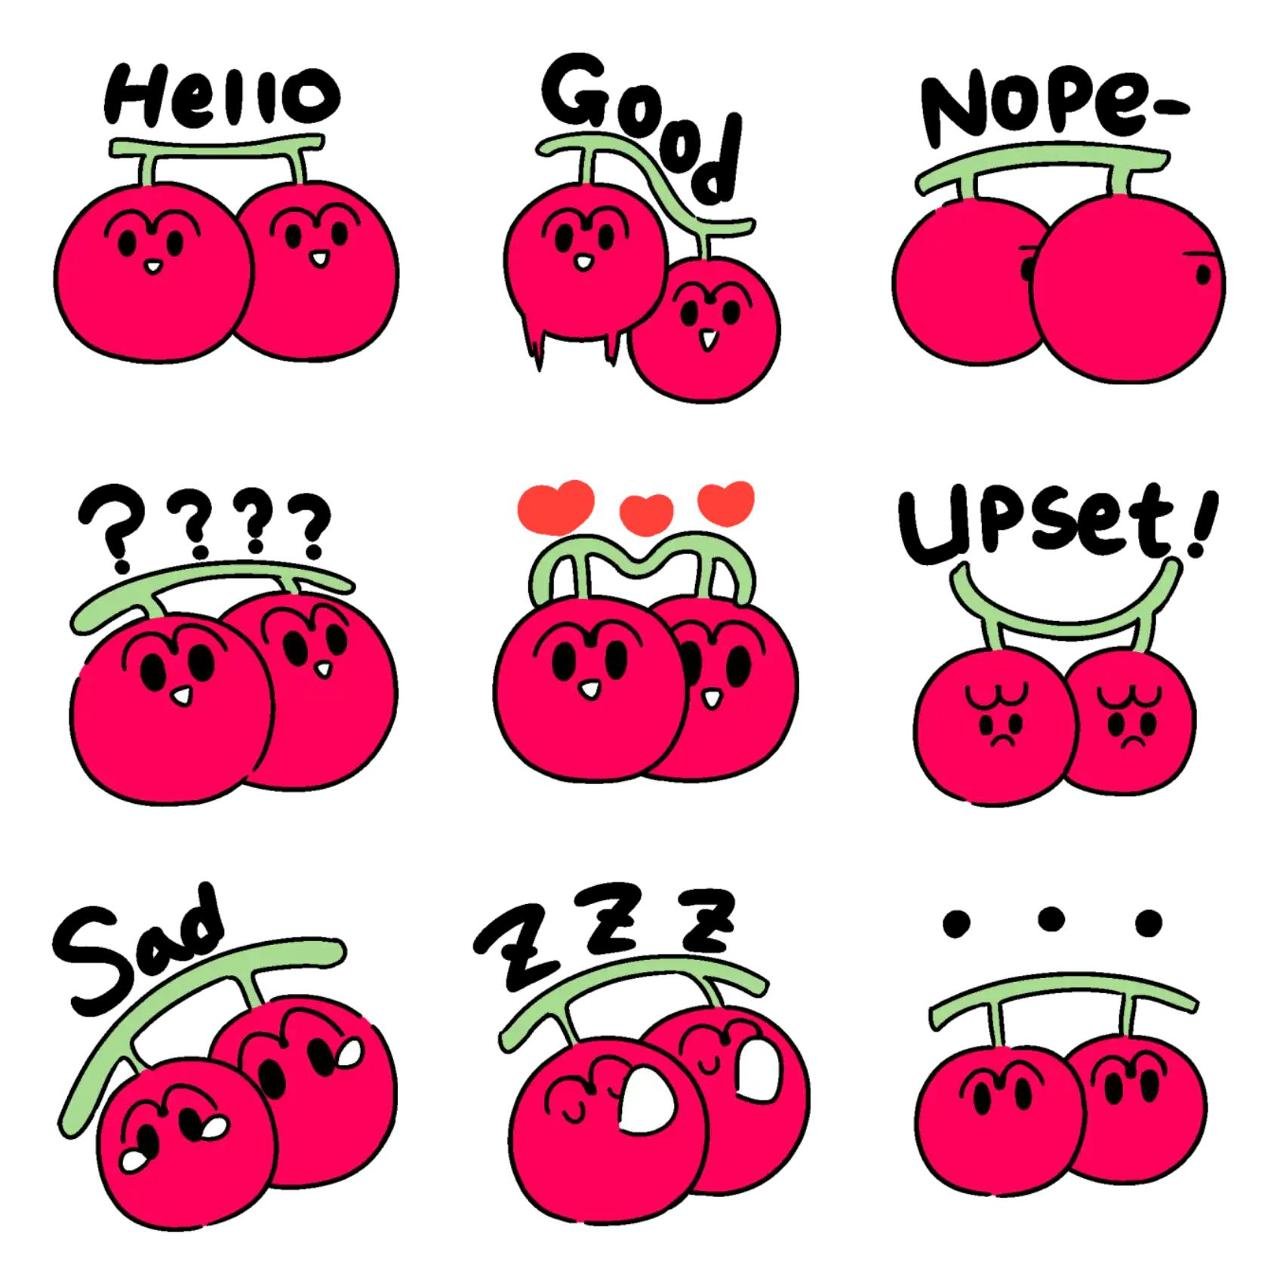 Cherry twins Animation/Cartoon,Food/Drink sticker pack for Whatsapp, Telegram, Signal, and others chatting and message apps